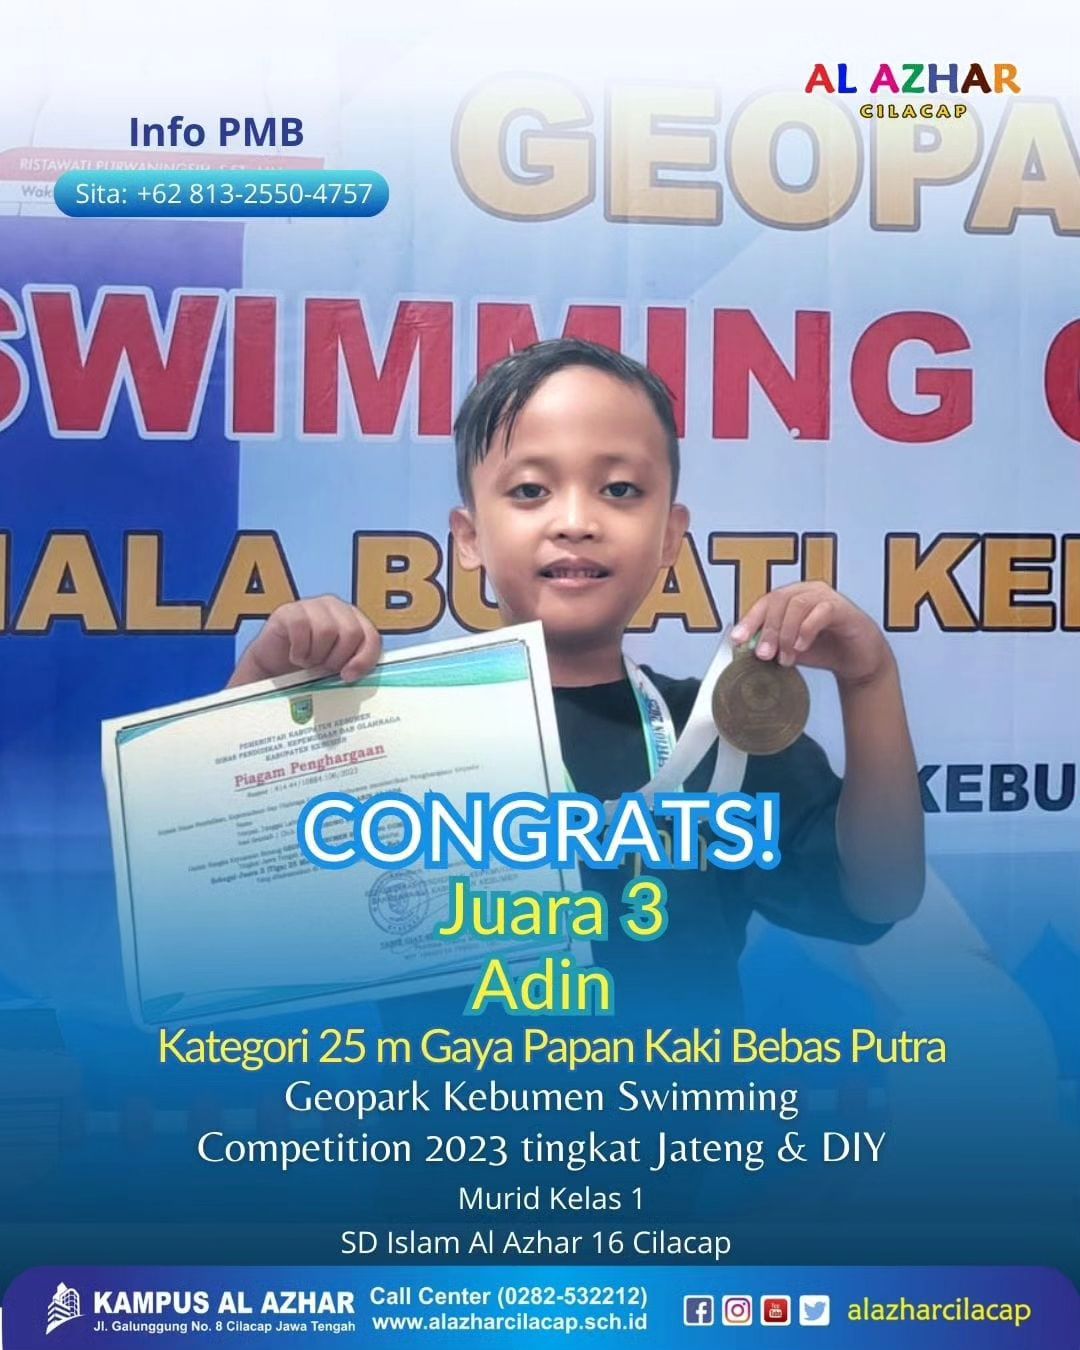 Geopark Swimming Competition 2023